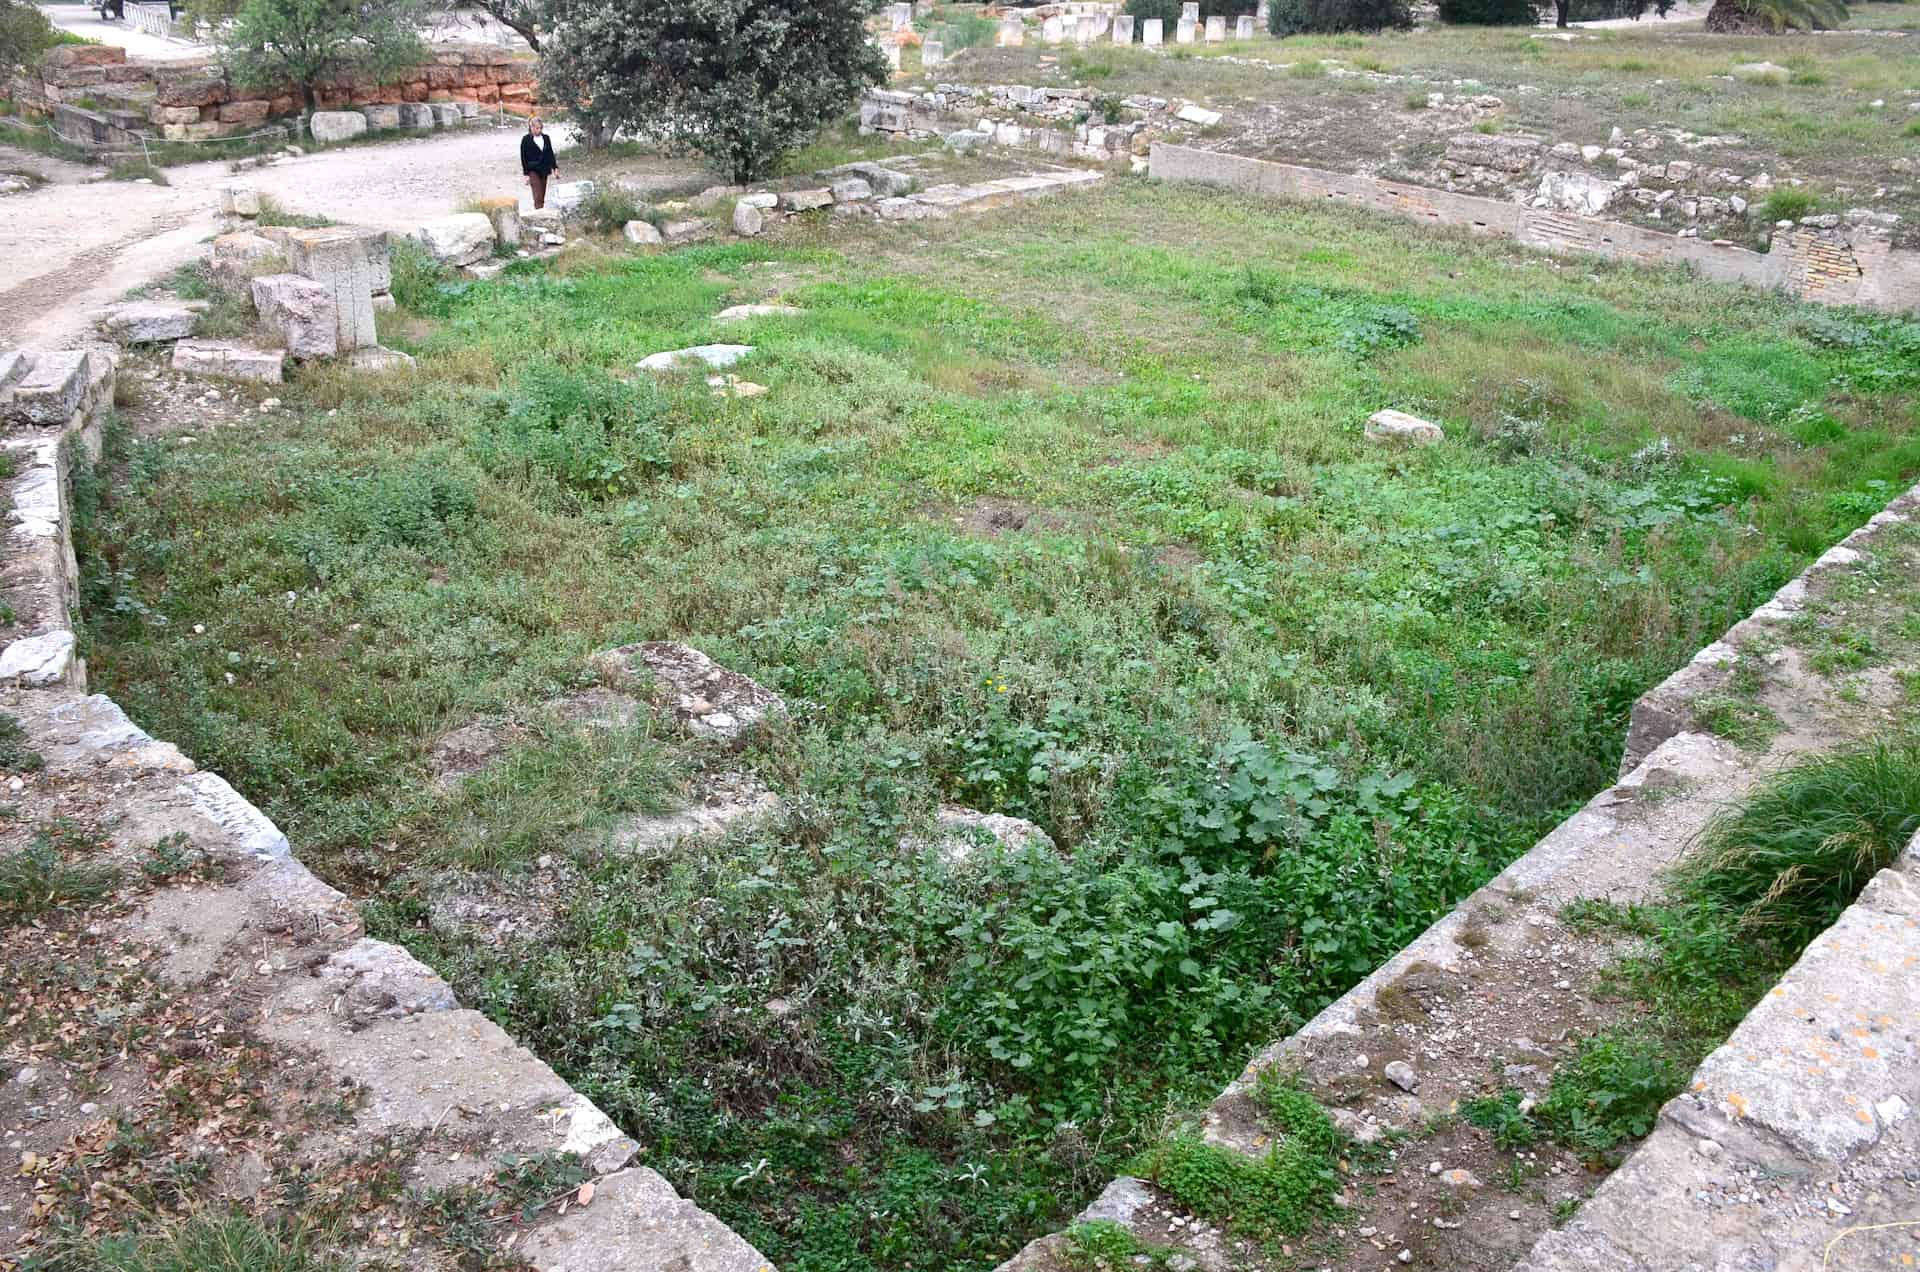 Southwest Fountain House at the Ancient Agora of Athens